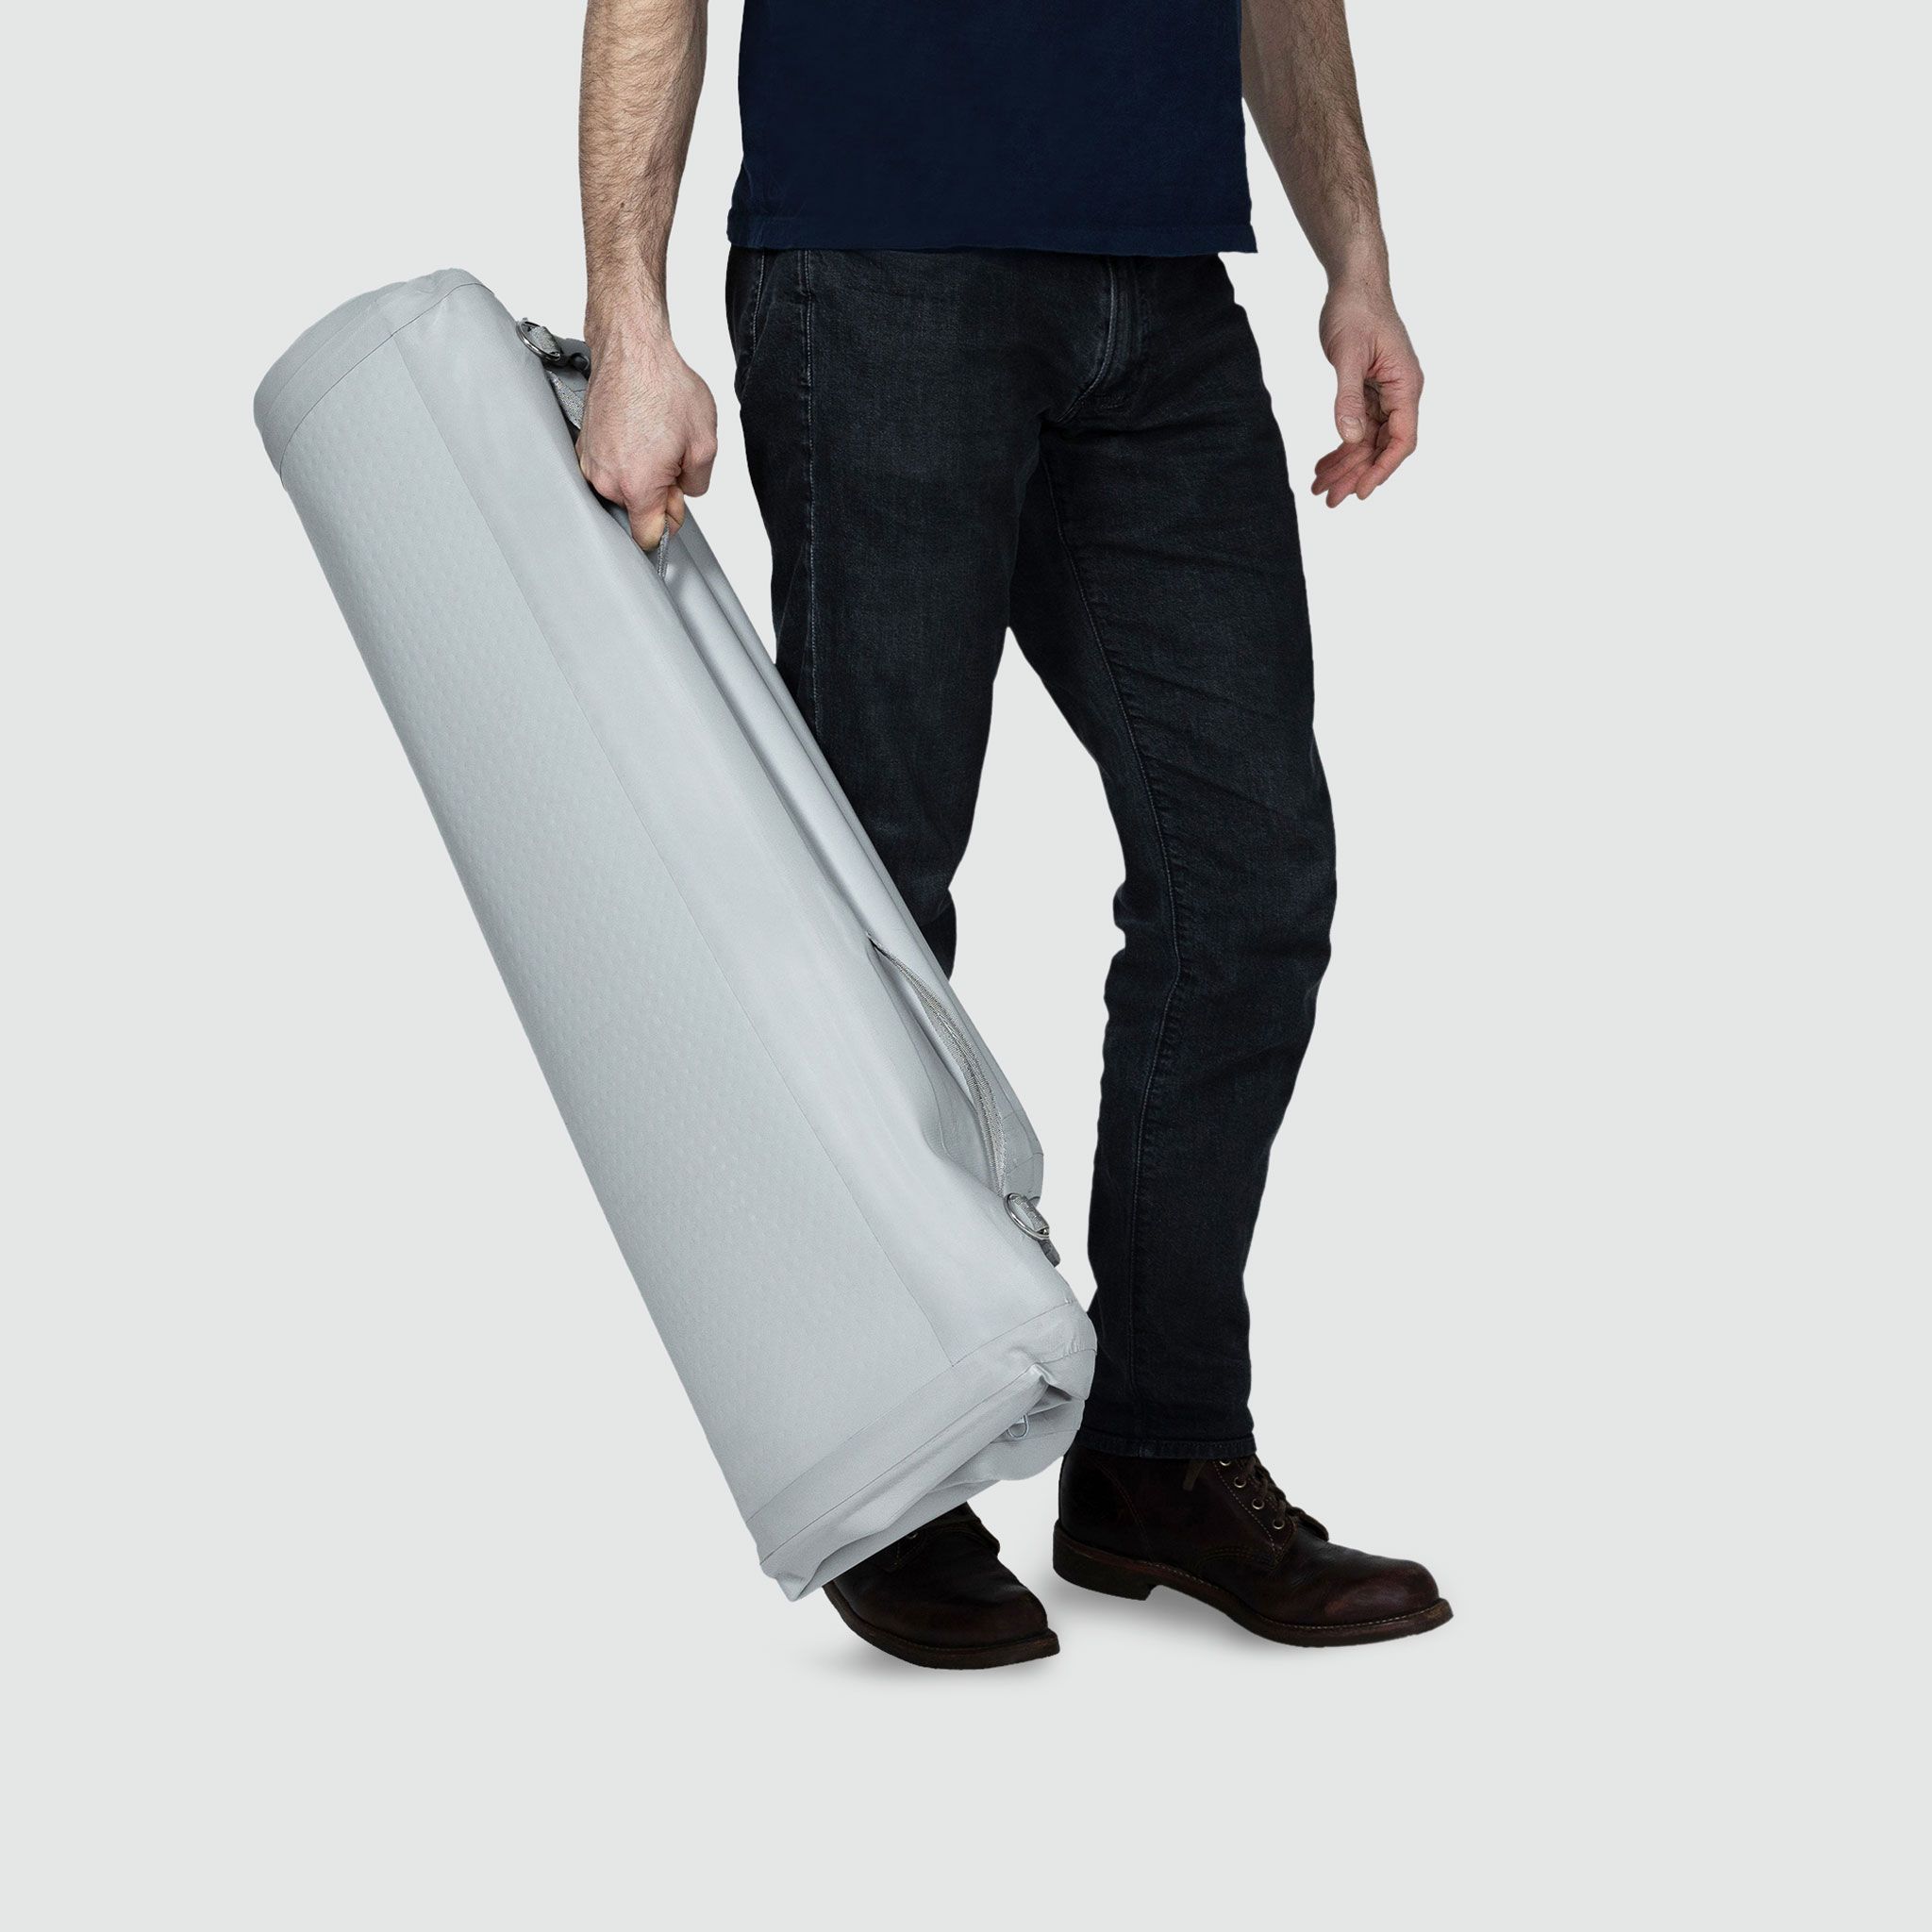 A man is carrying a deflated Enventur